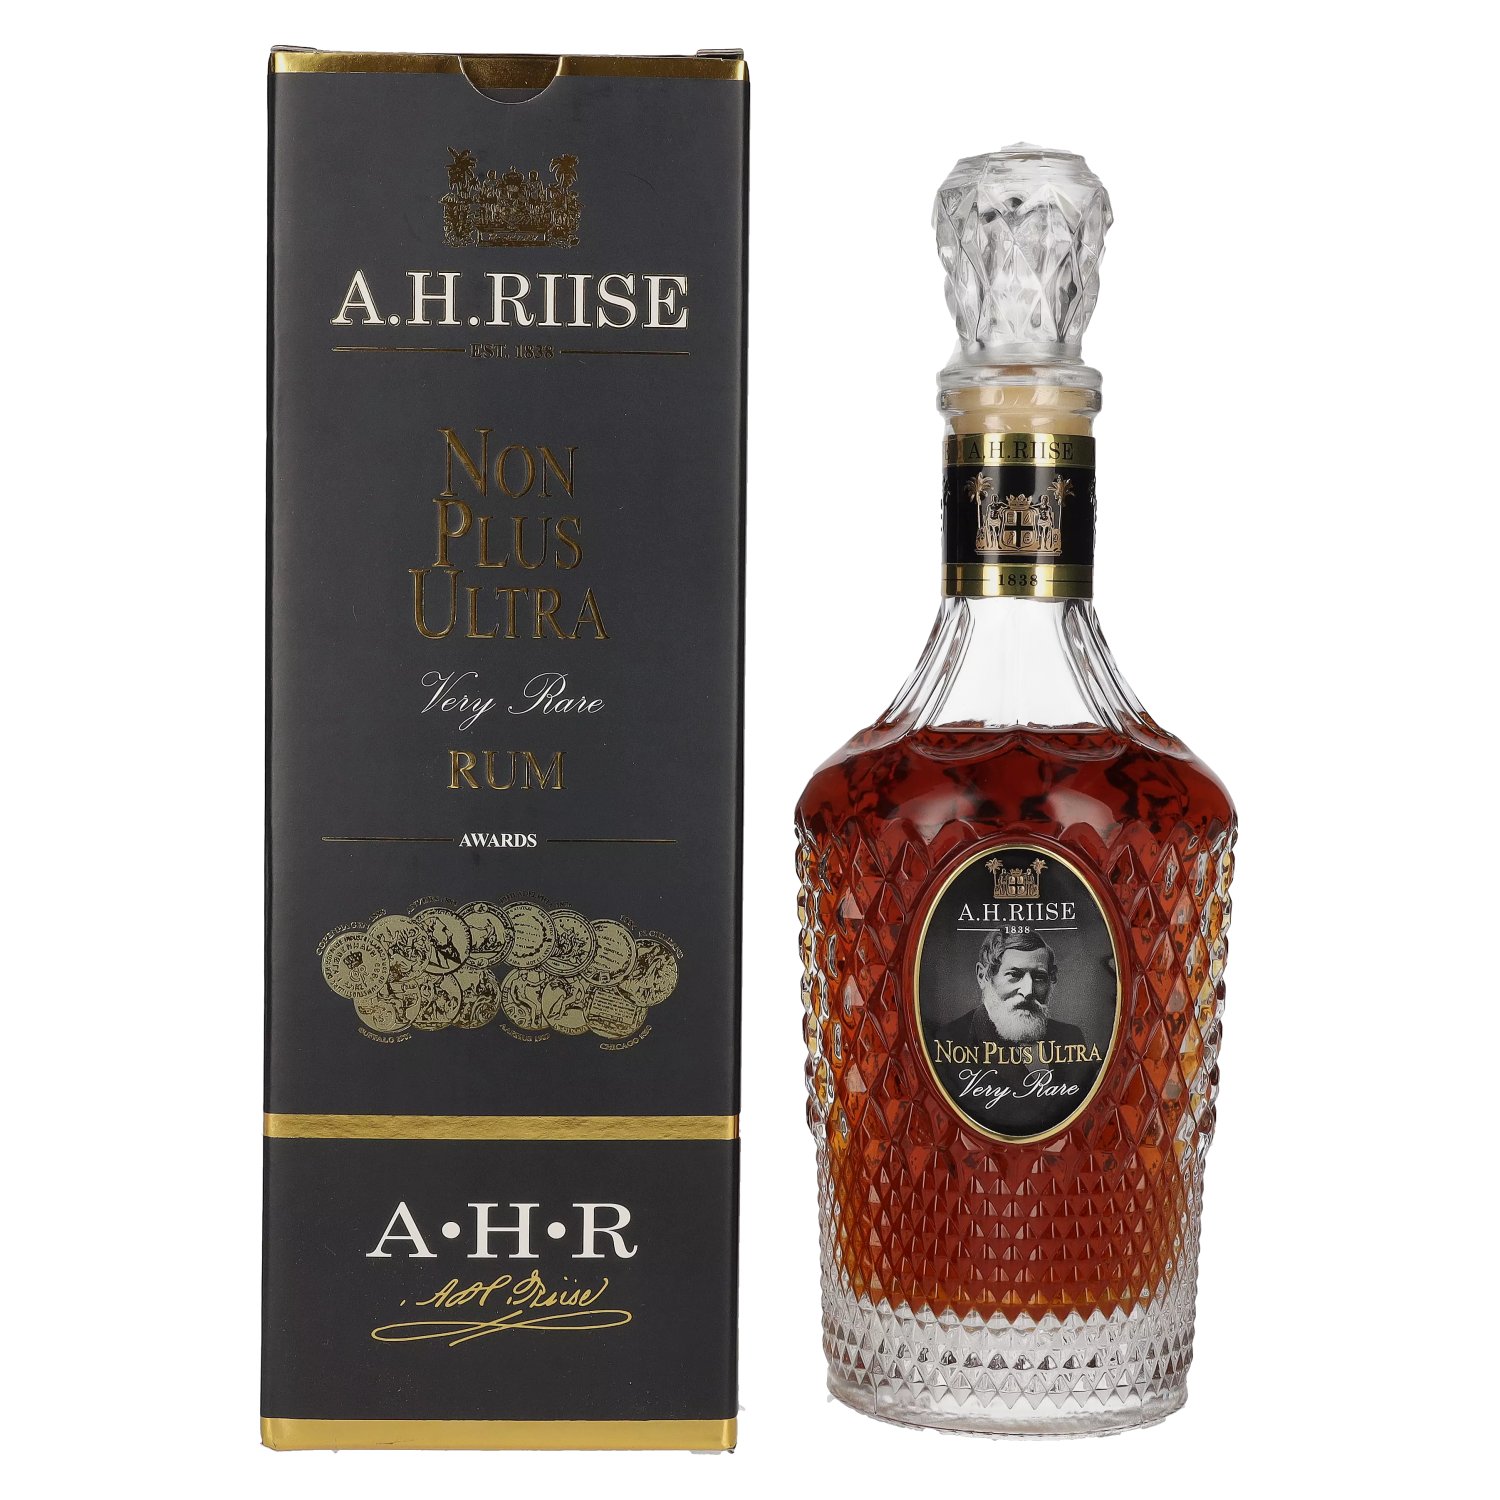 Rare Giftbox A.H. - Old 0,7l ULTRA Riise PLUS Vol. Very 42% Rum Edition NON in